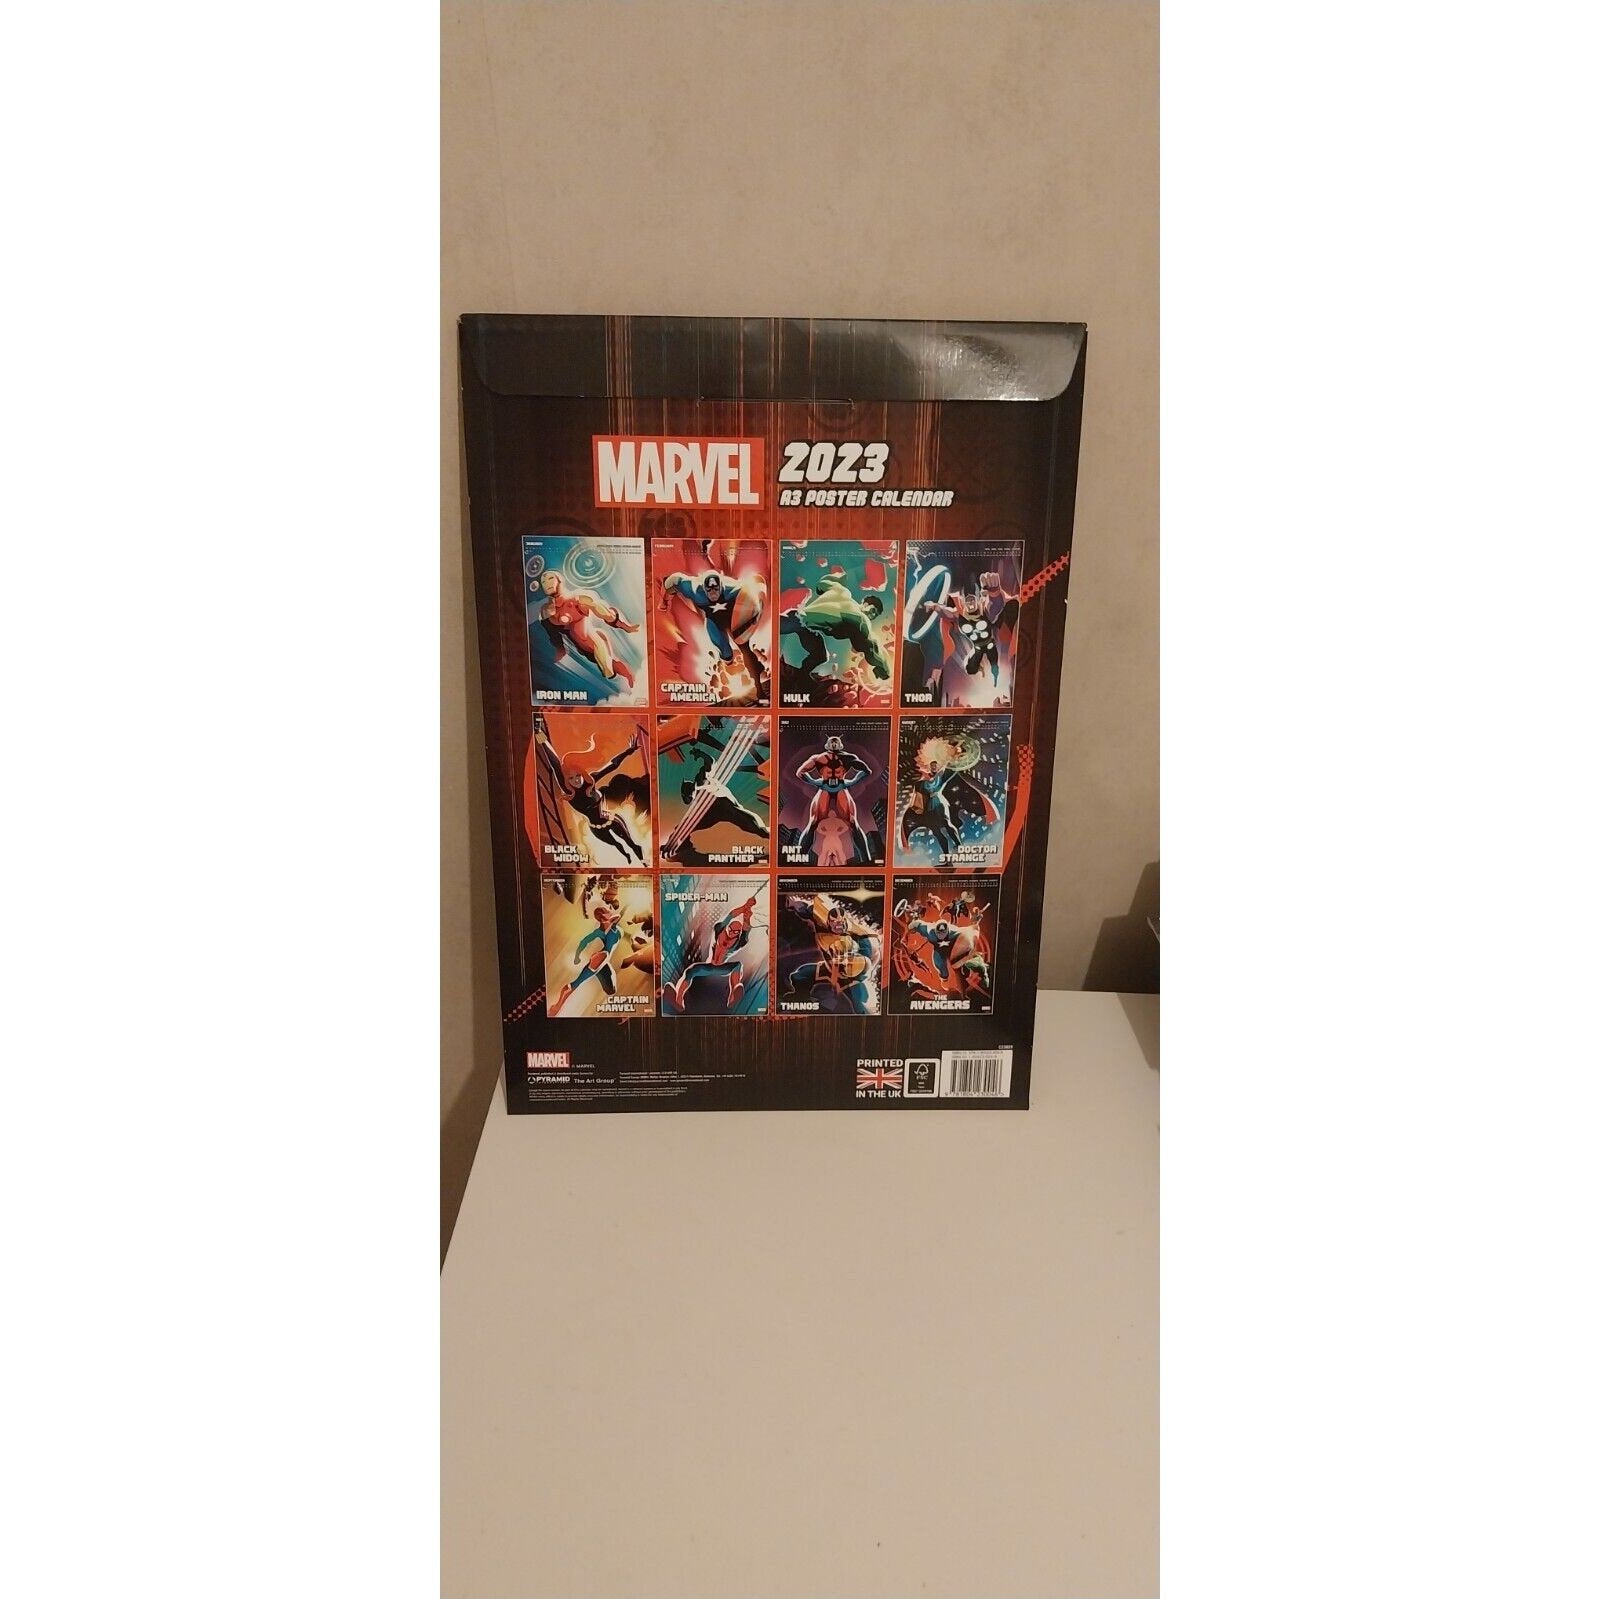 Marvel Avengers Heroes - Calendrier affiche A3 2023